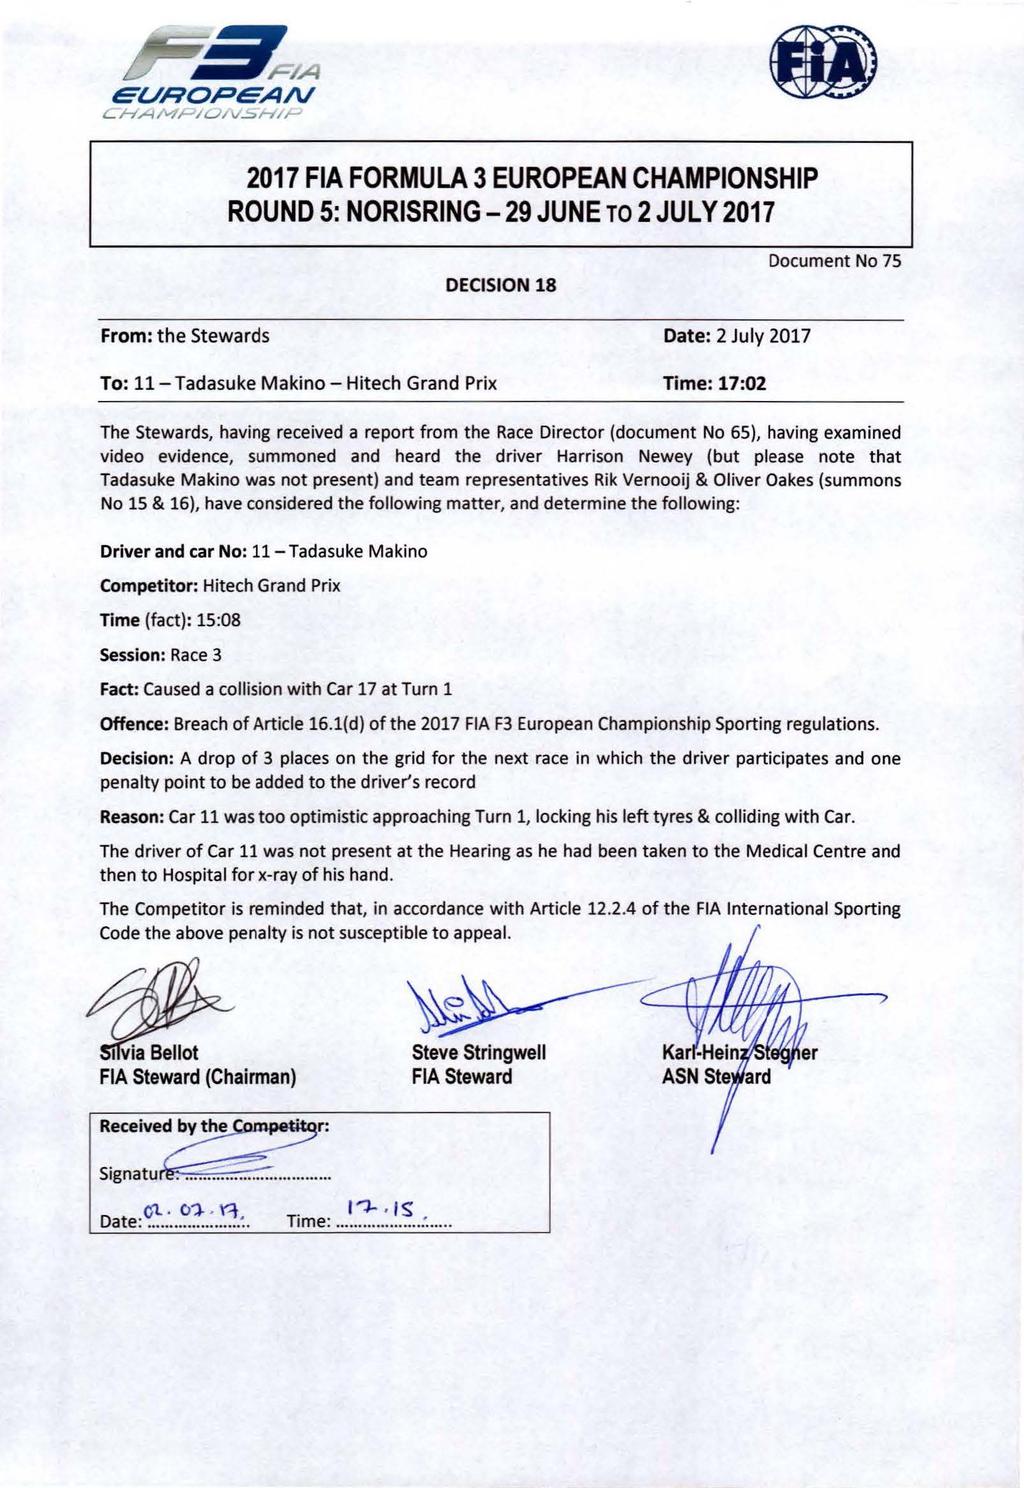 ROUND 5: NORISRING-29 JUNE TO 2 JUL Y 2017 DECISION 18 Document No 75 From: the Stewards Date: 2 July 2017 To: 11-Tadasuke Makino - Hitech Grand Prix Time: 17:02 The Stewards, having received a